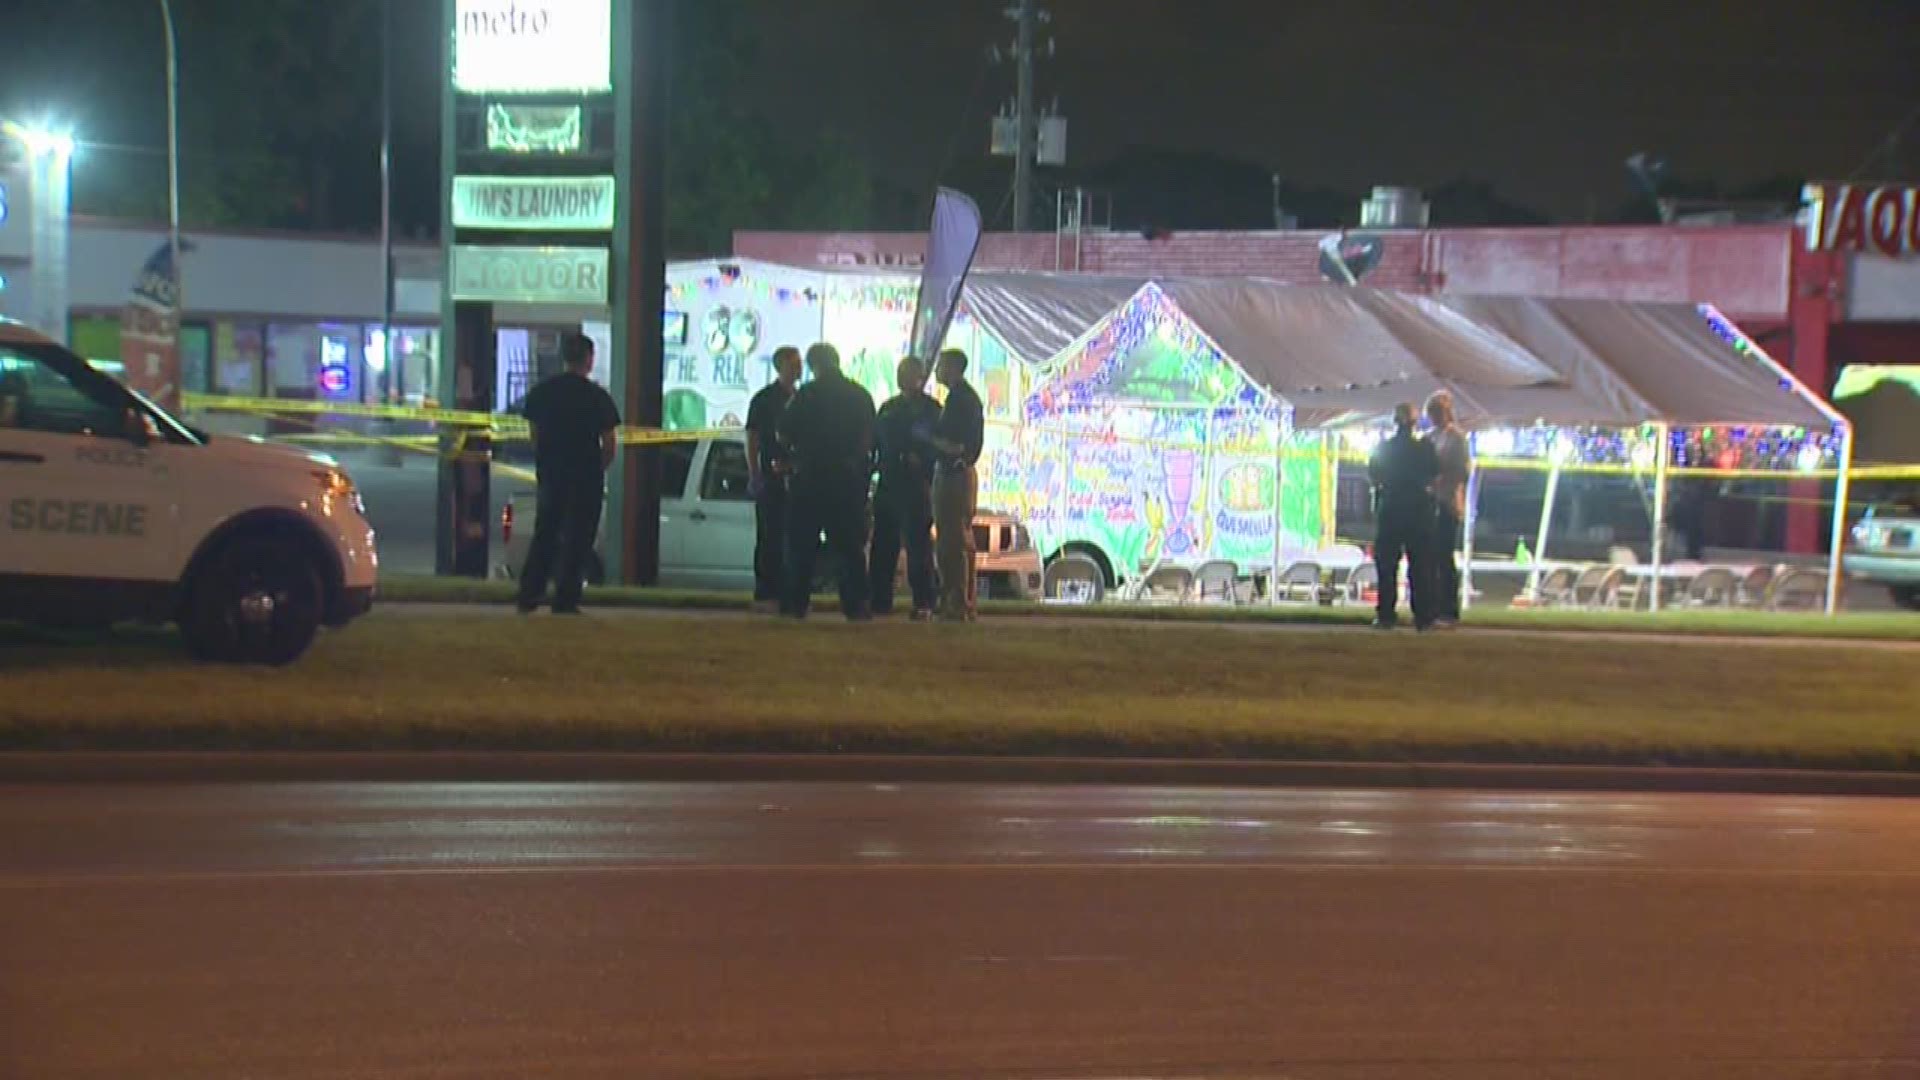 One person was shot and killed early Sunday after an argument outside a food truck.